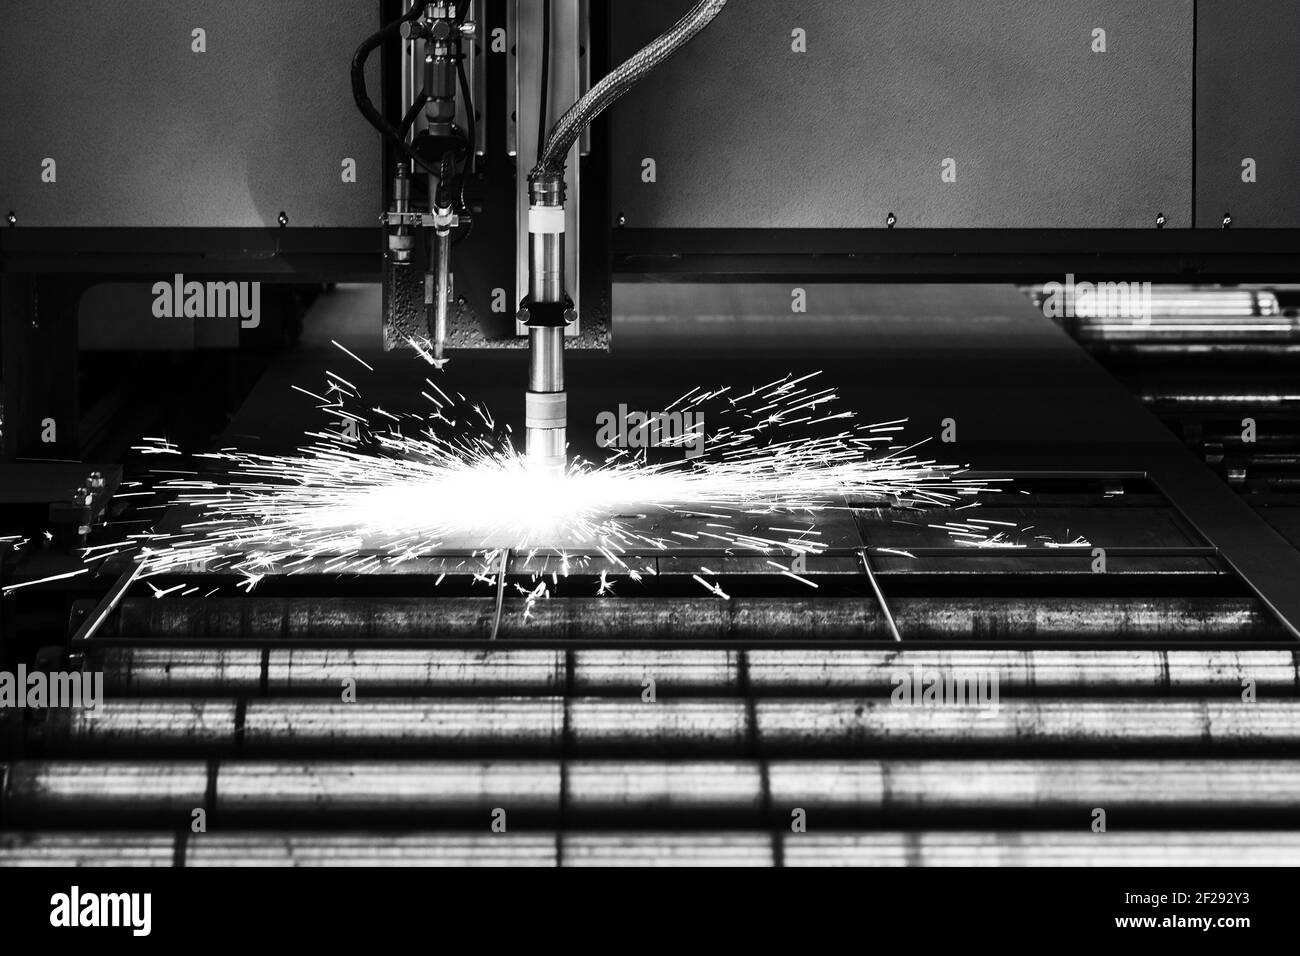 Industrial cnc plasma machine cutting of metal plate and profile Stock Photo